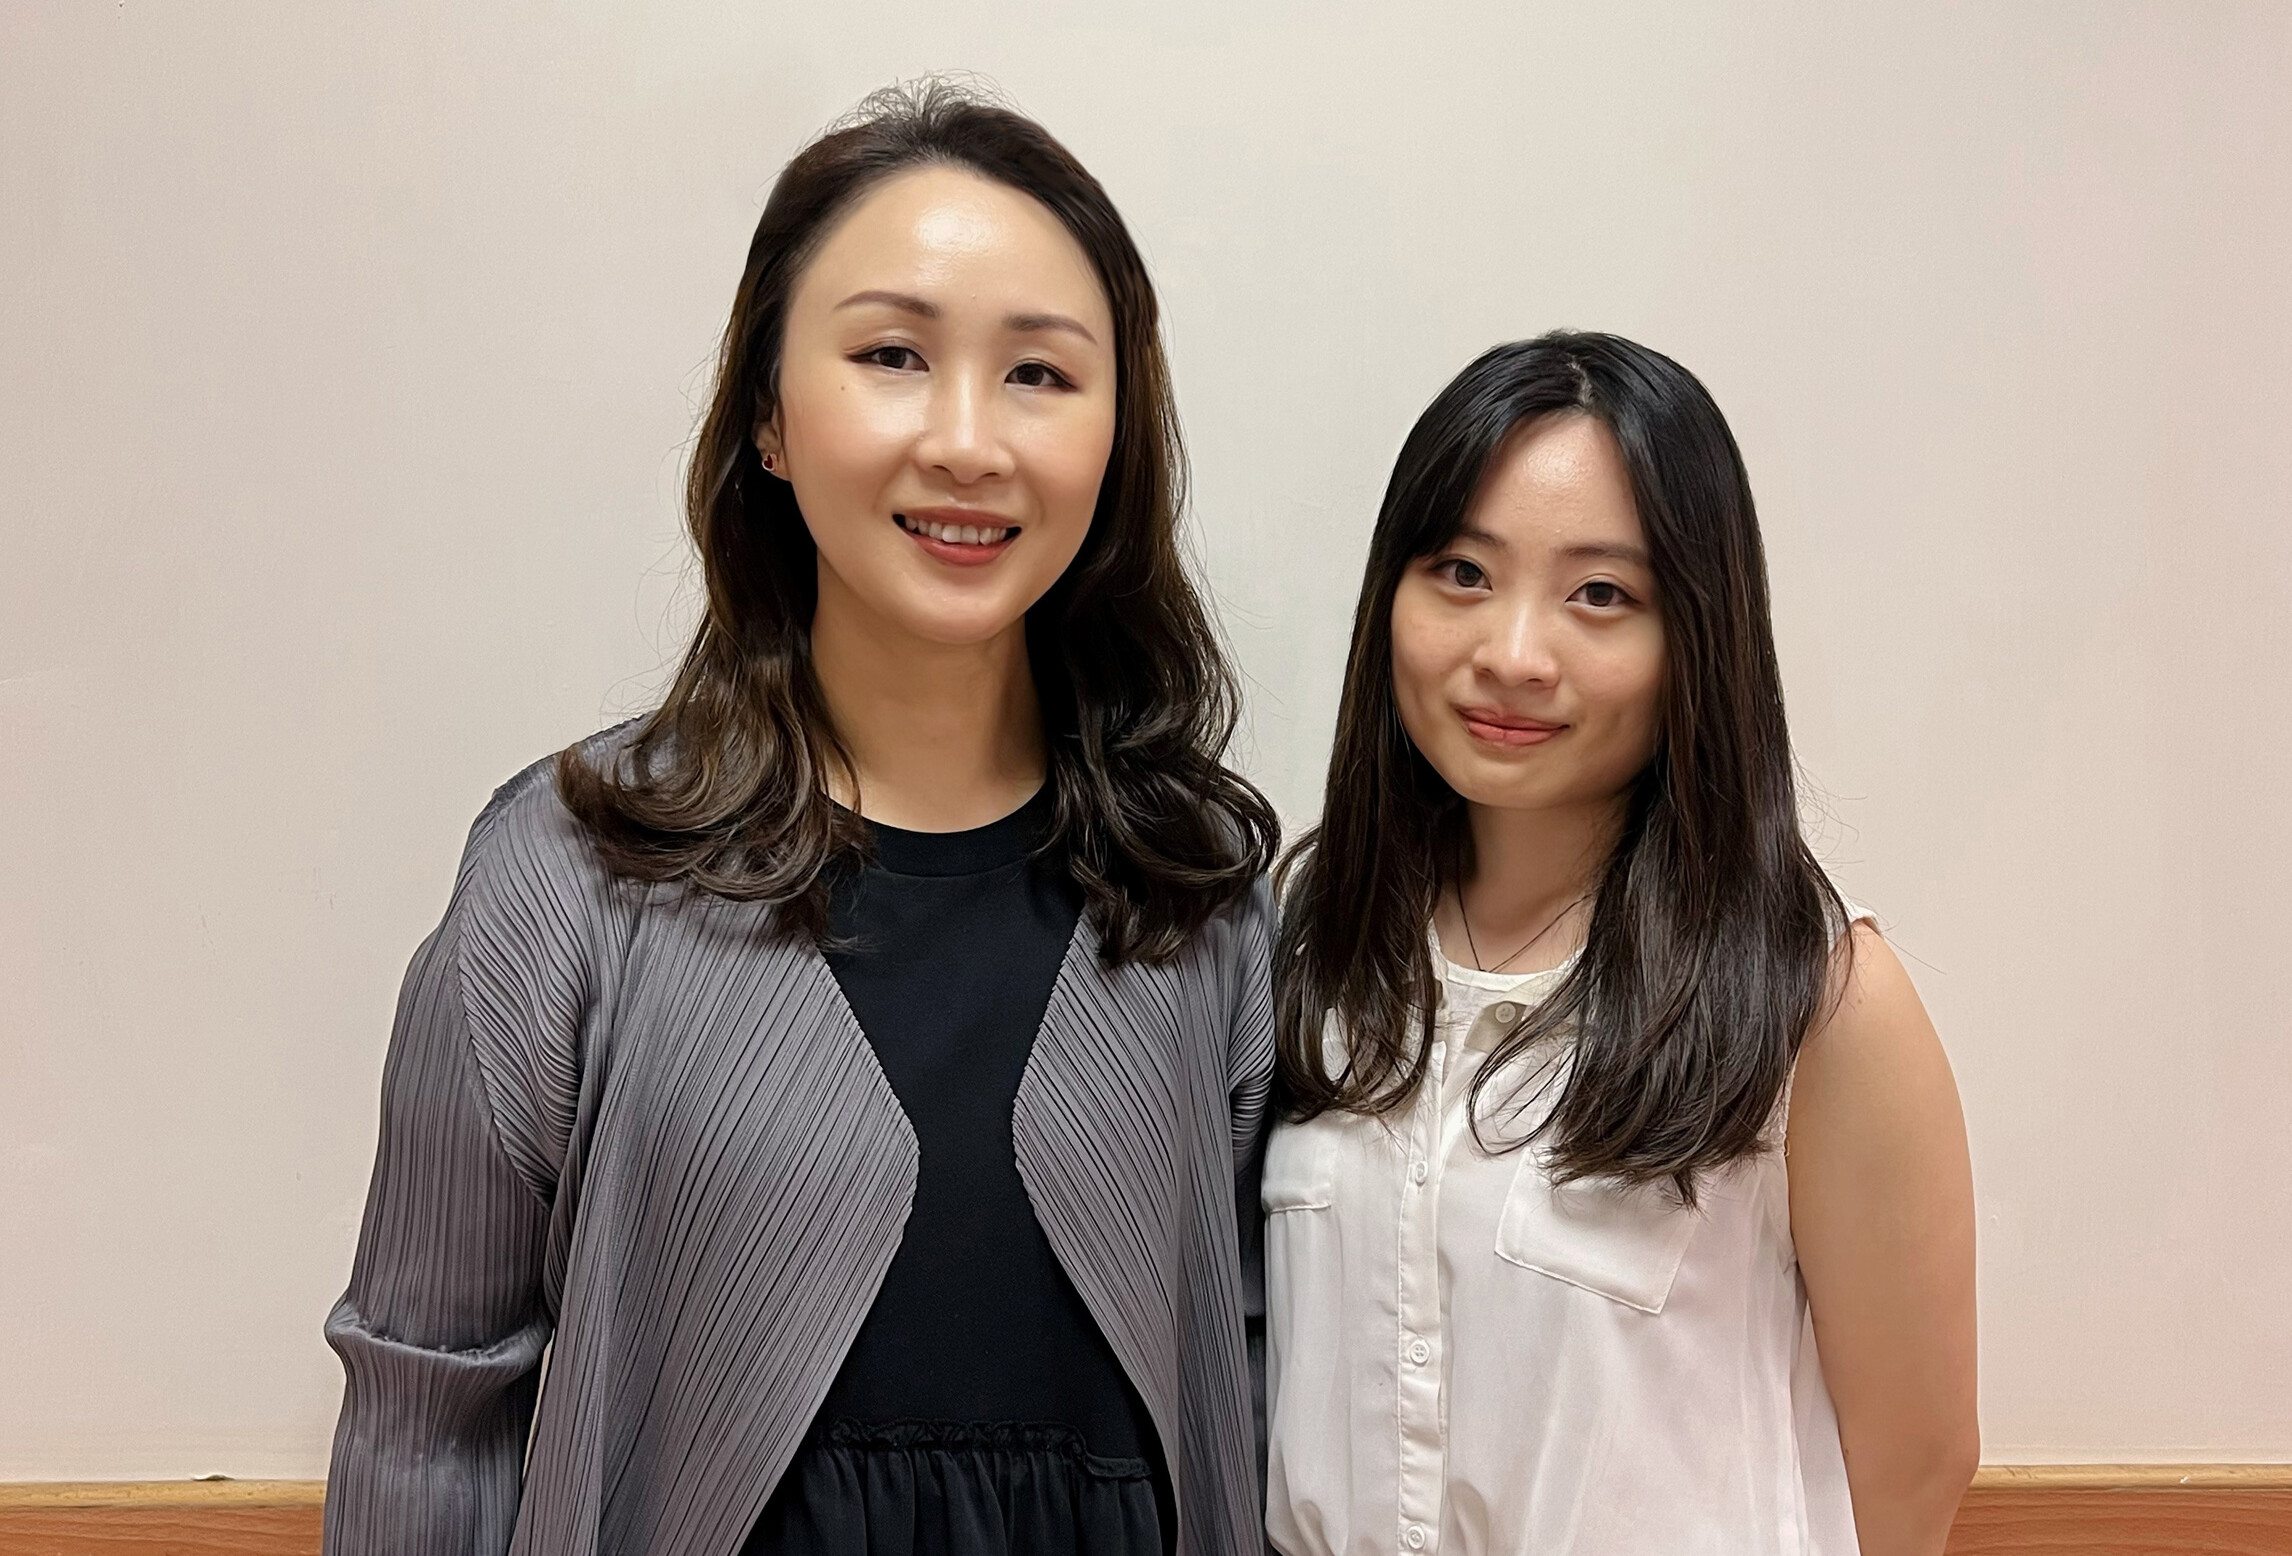 Professor Liona Poon and Dr. Hillary Leung